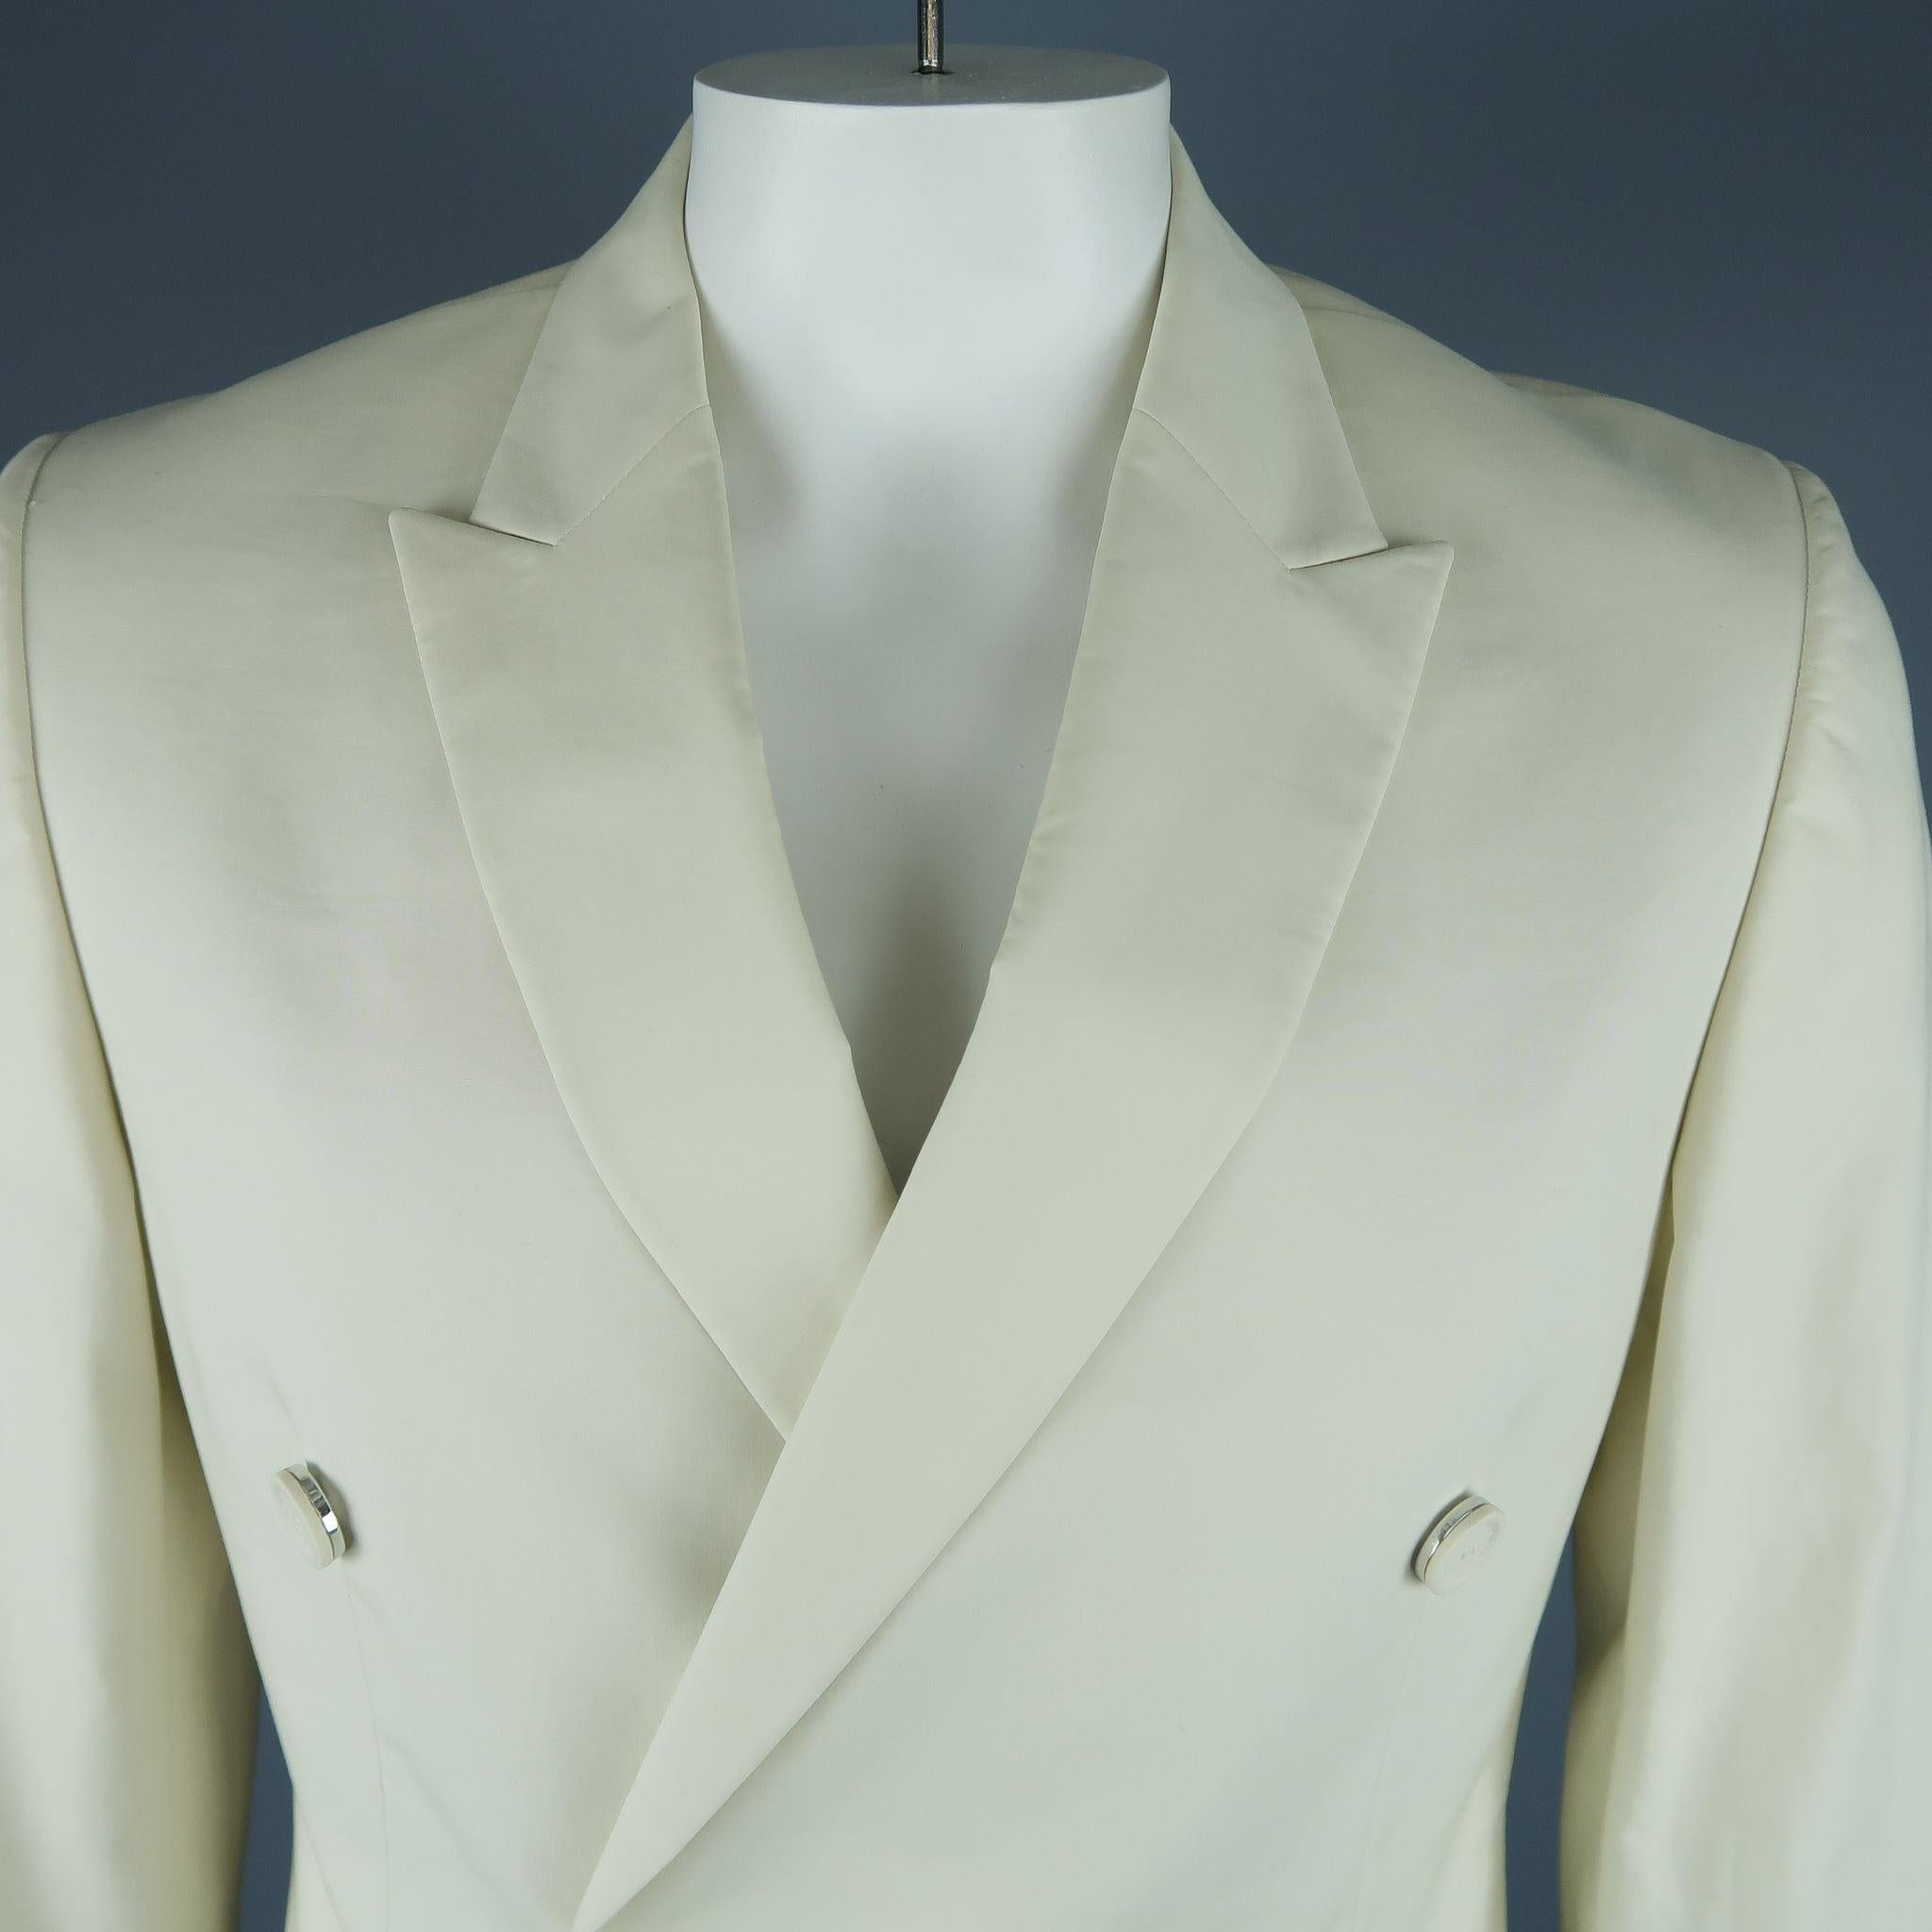 CALVIN KLEIN COLLECTION sport coat comes in a bone white with a full liner featuring a peak lapel, flap pockets, and a double breasted closure. Made in Italy.New With Tags.
 

Marked:   52/42 

Measurements: 
 
Shoulder: 18 inches 
Chest: 42 inches